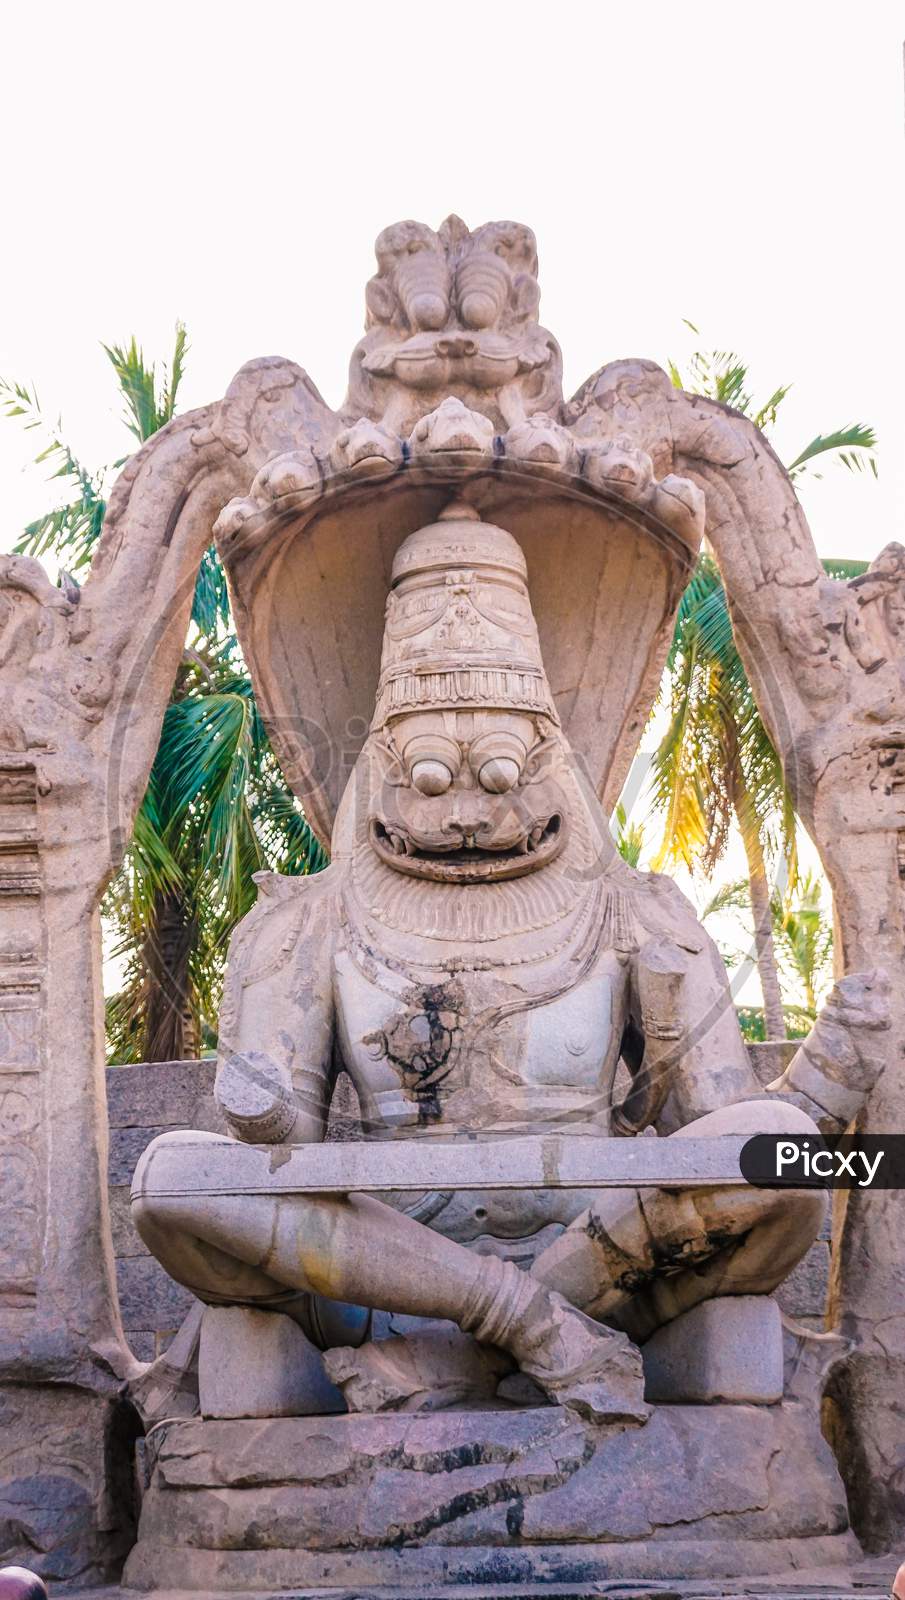 Carving of Hindu God by the beach